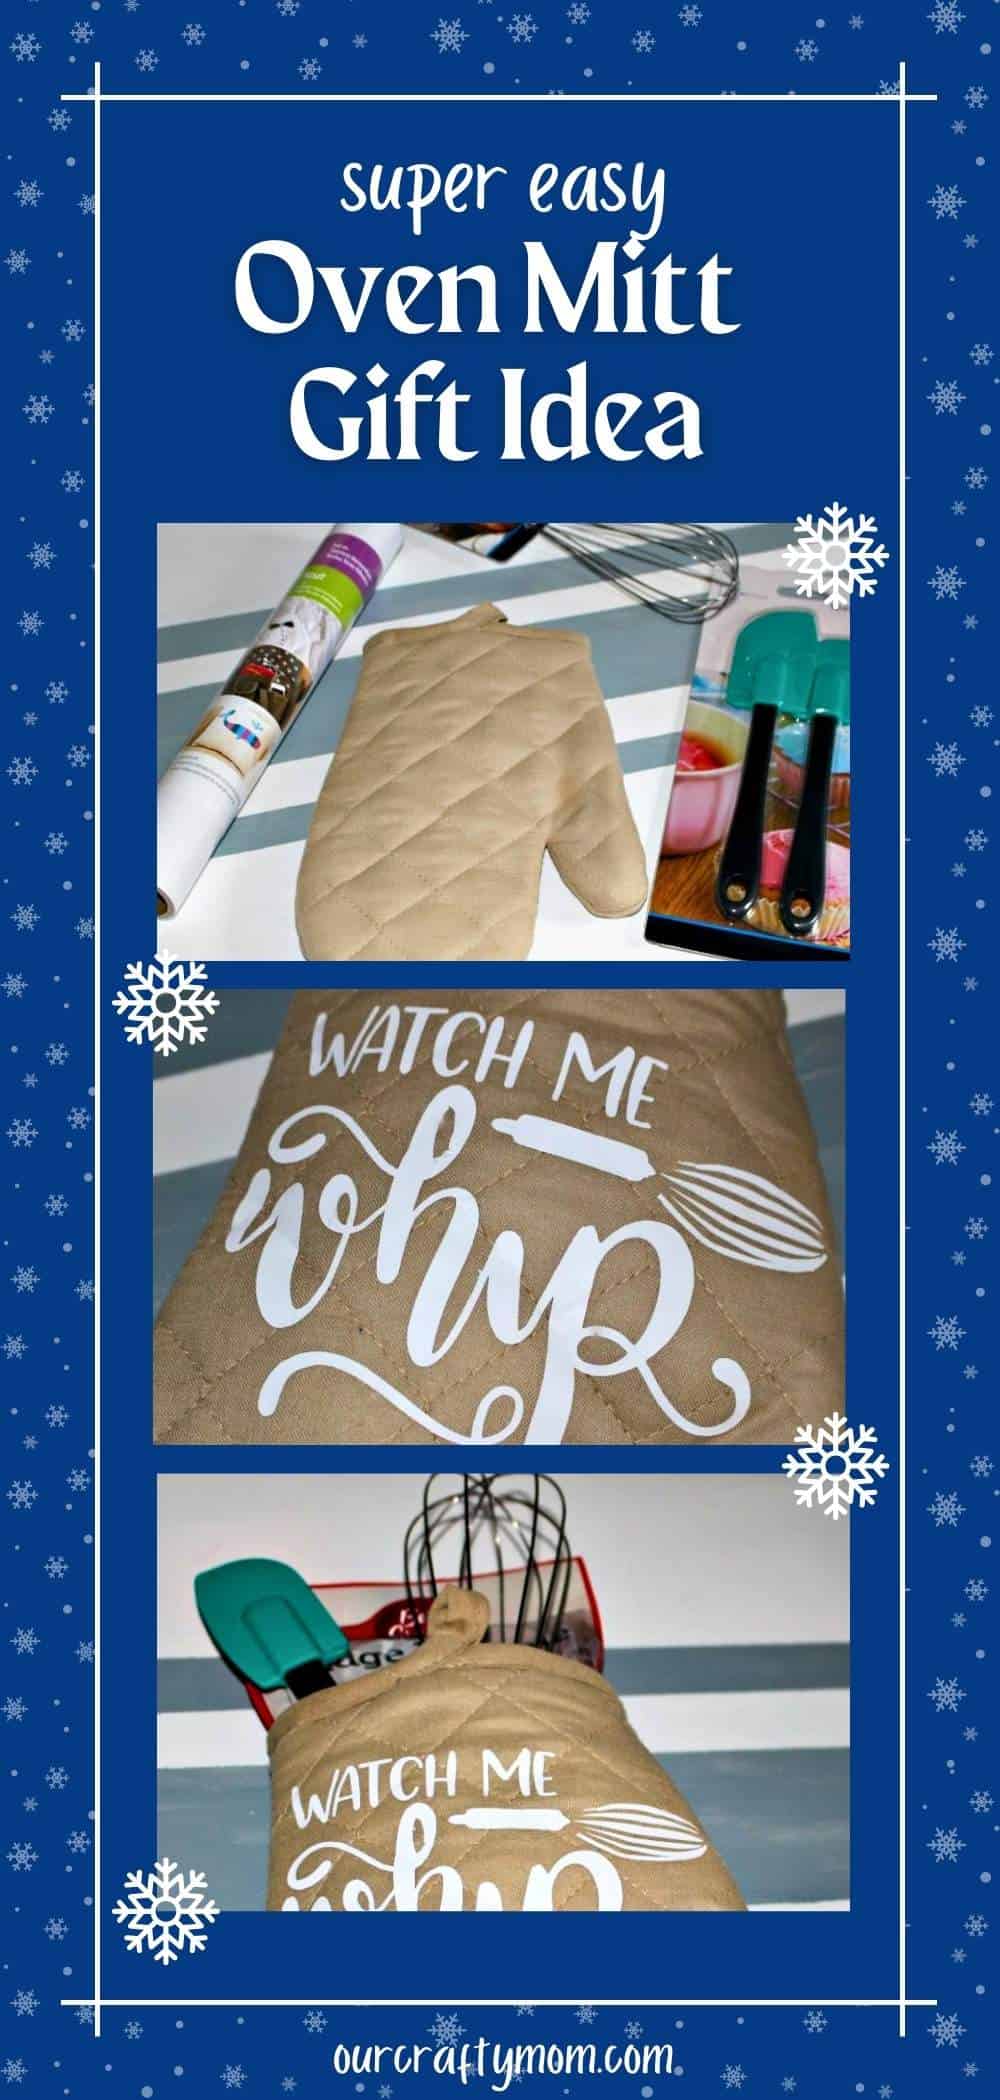 oven mitt gift with Cricut collage